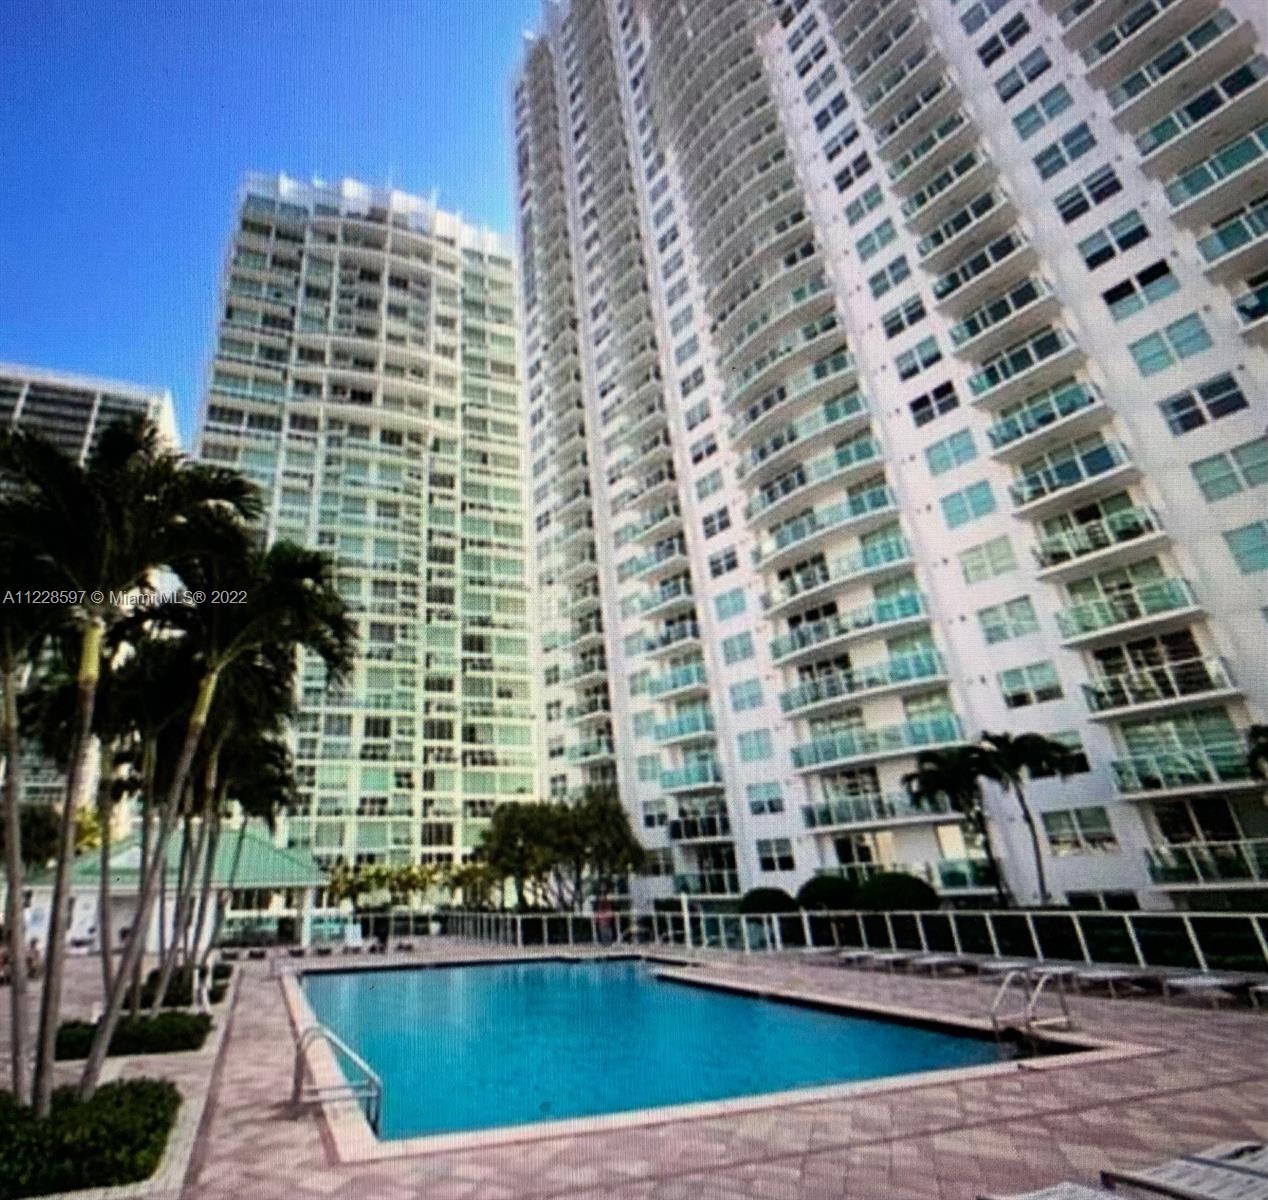 Brickell on the River North image #8